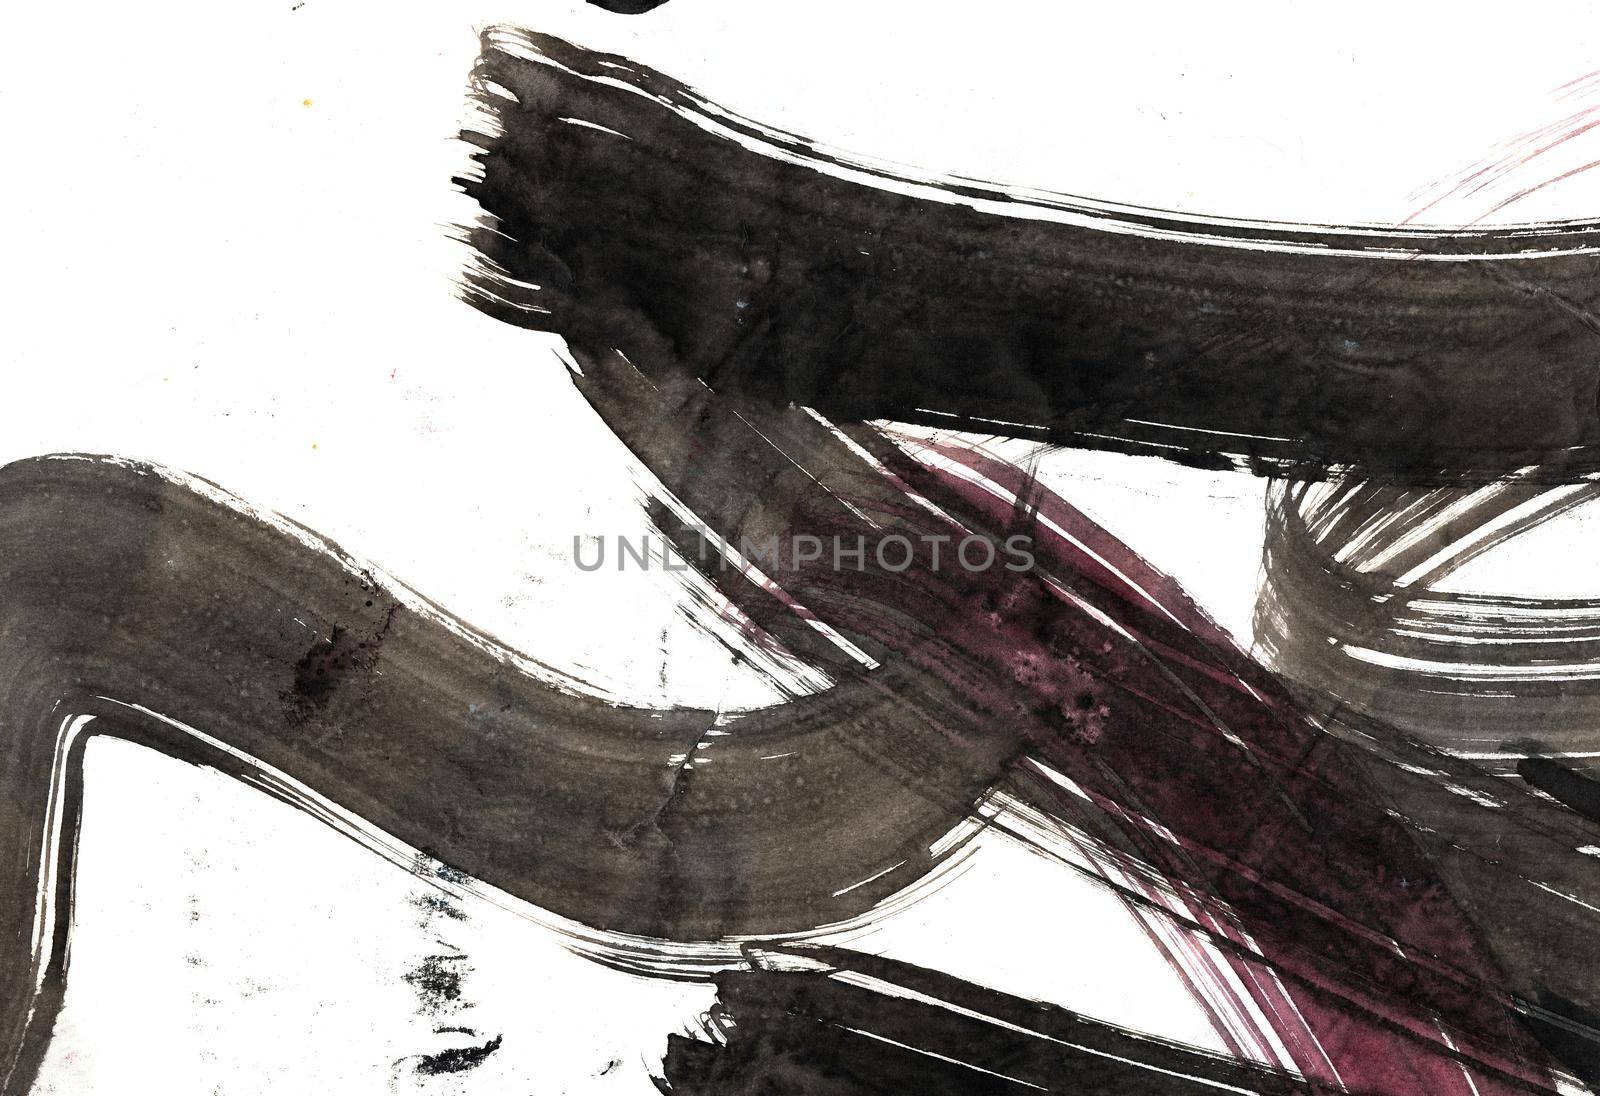 Abstract background with black brush strokes, expressive calligraphy with elements of letters